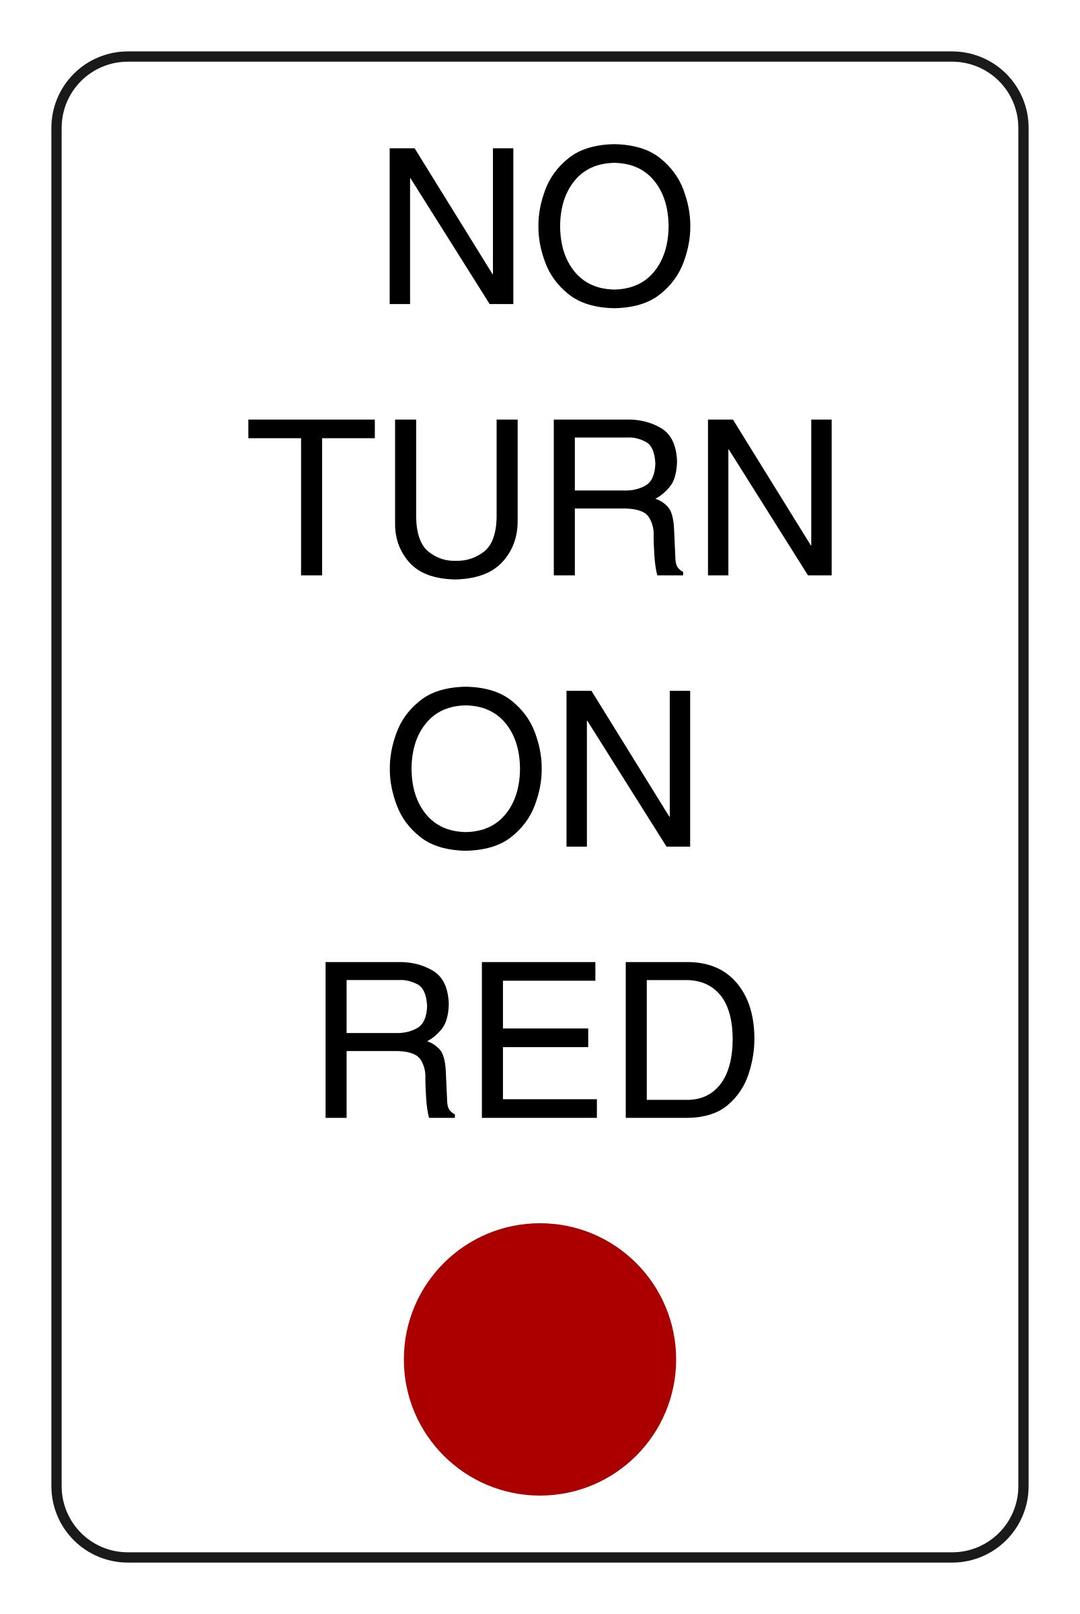 No Turn on Red sign png transparent